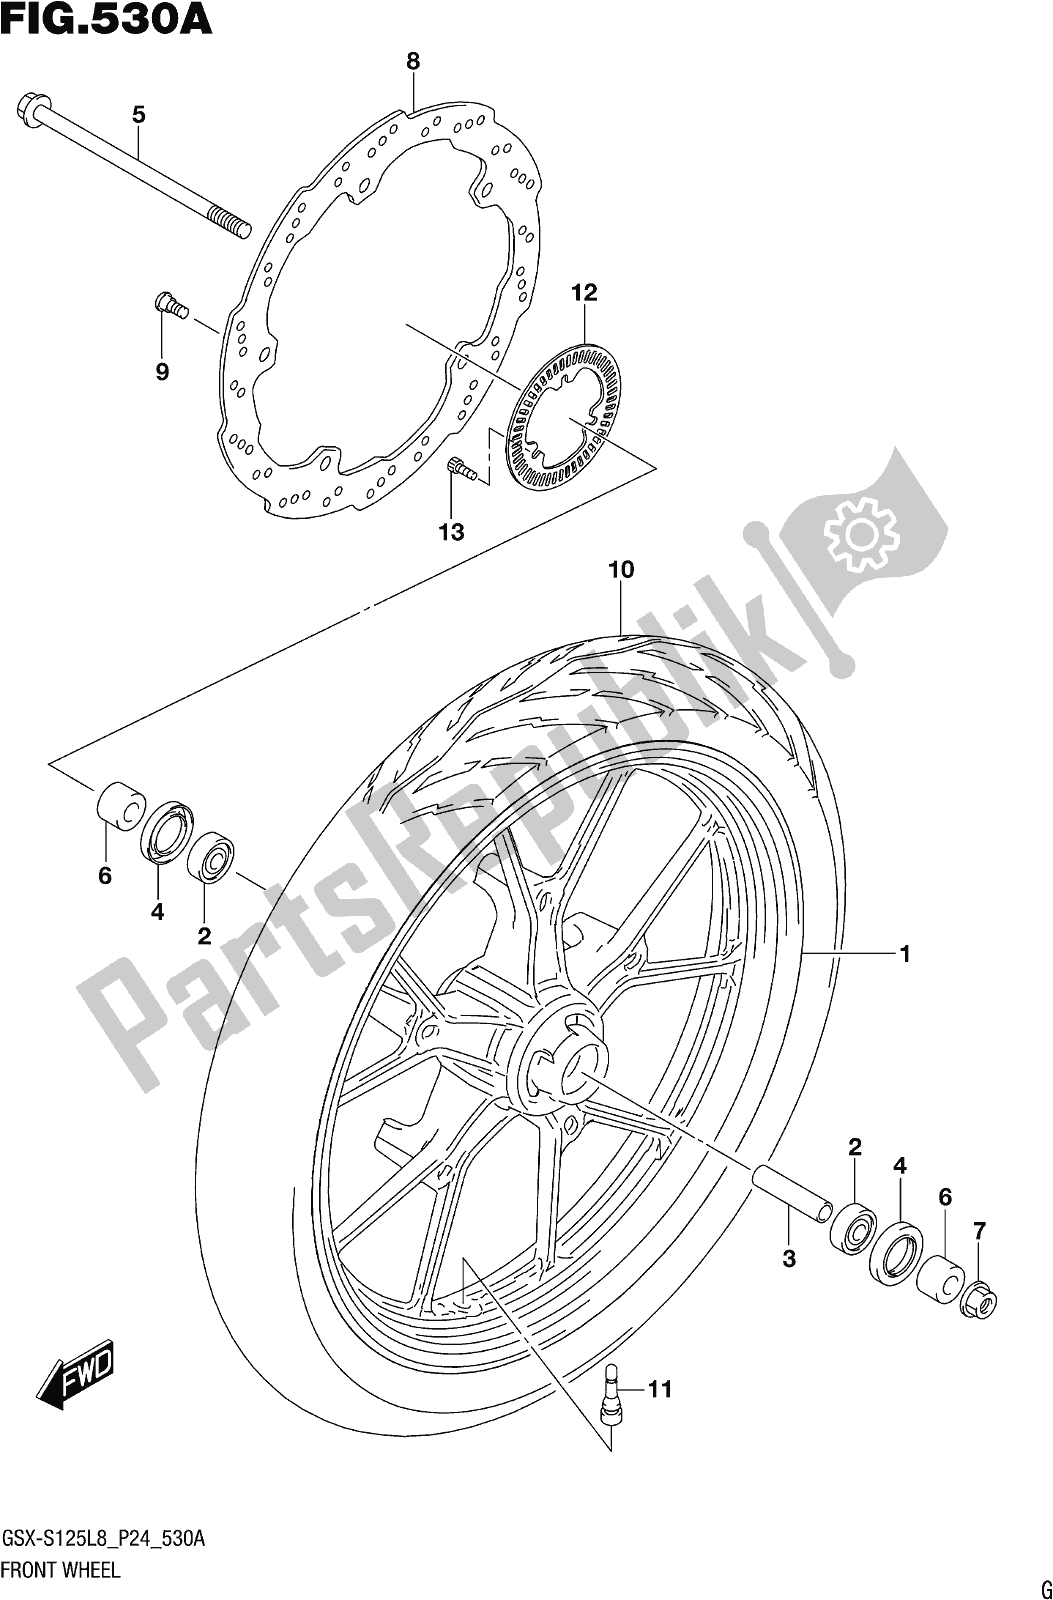 All parts for the Fig. 530a Front Wheel of the Suzuki Gsx-s 125 ML 2018